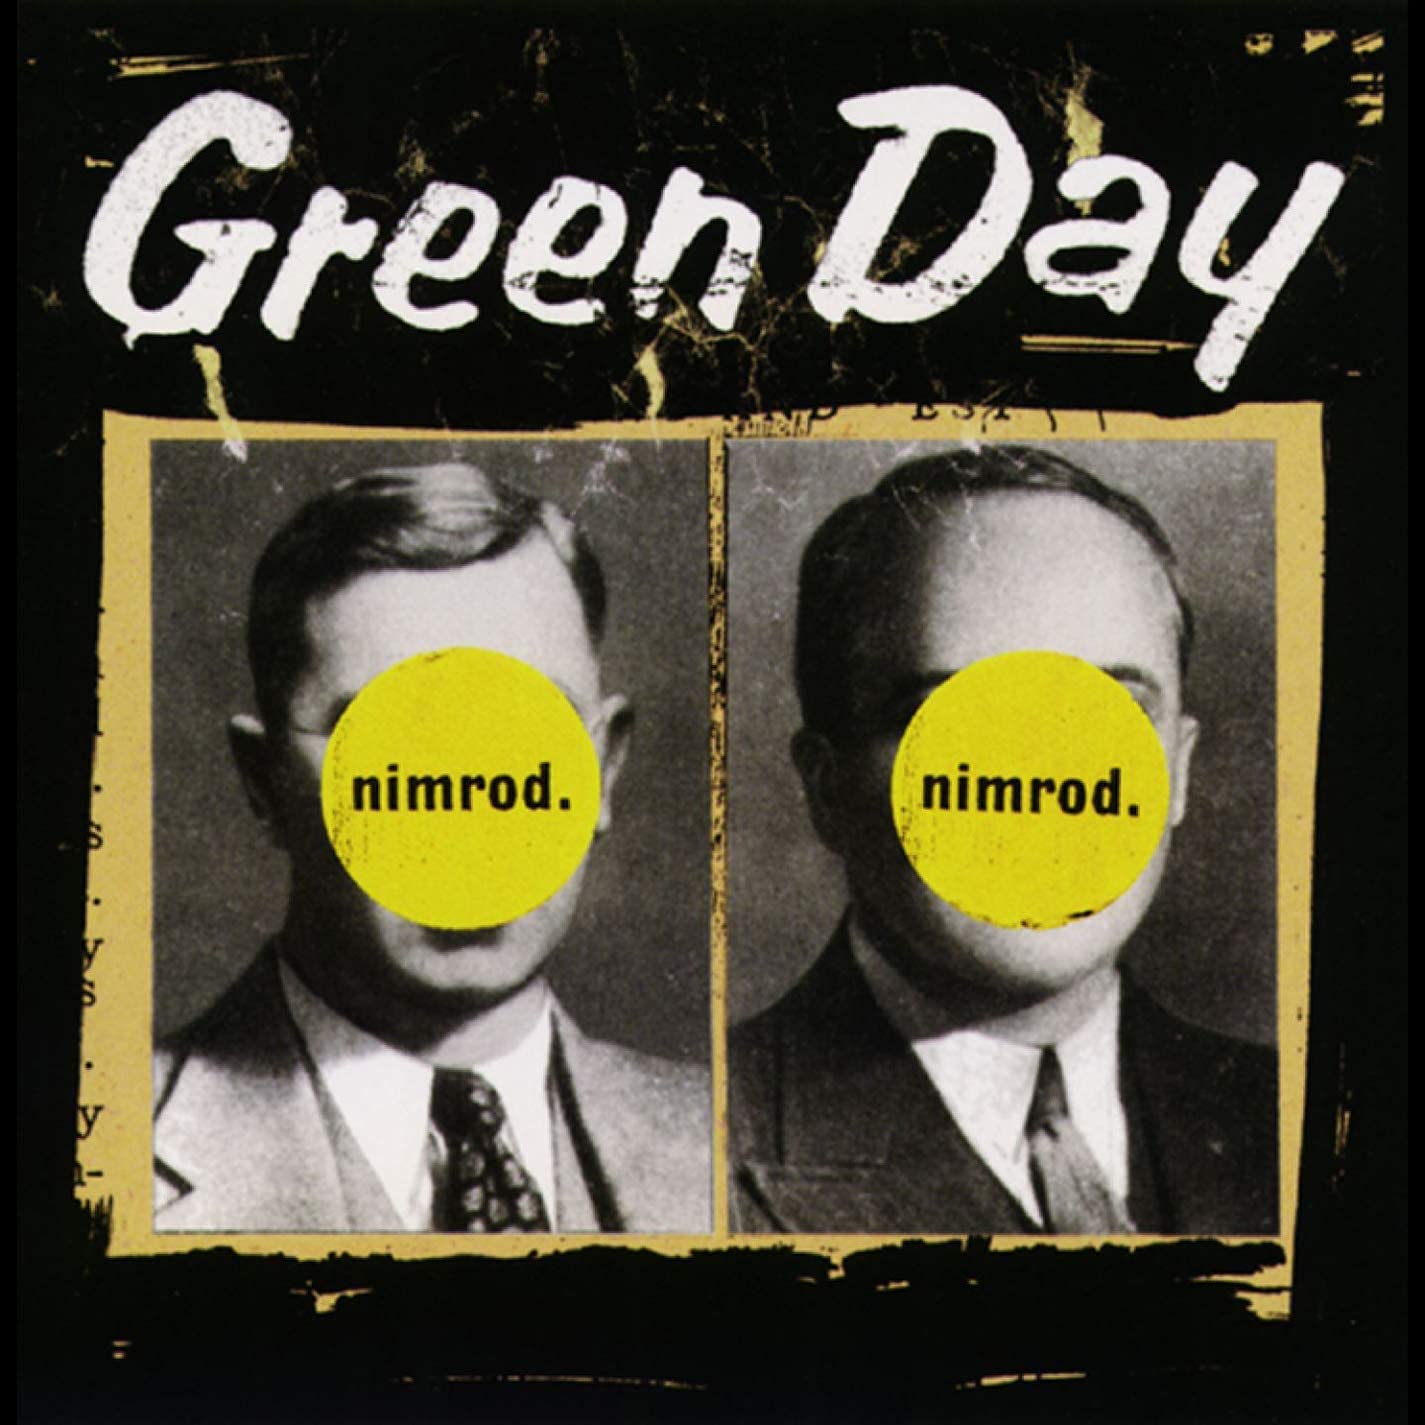 New vinyl pressing of Green Day’s 1997 platinum selling album Nimrod. The album features one of the band’s biggest singles in Good Riddance (Time Of Your Life).